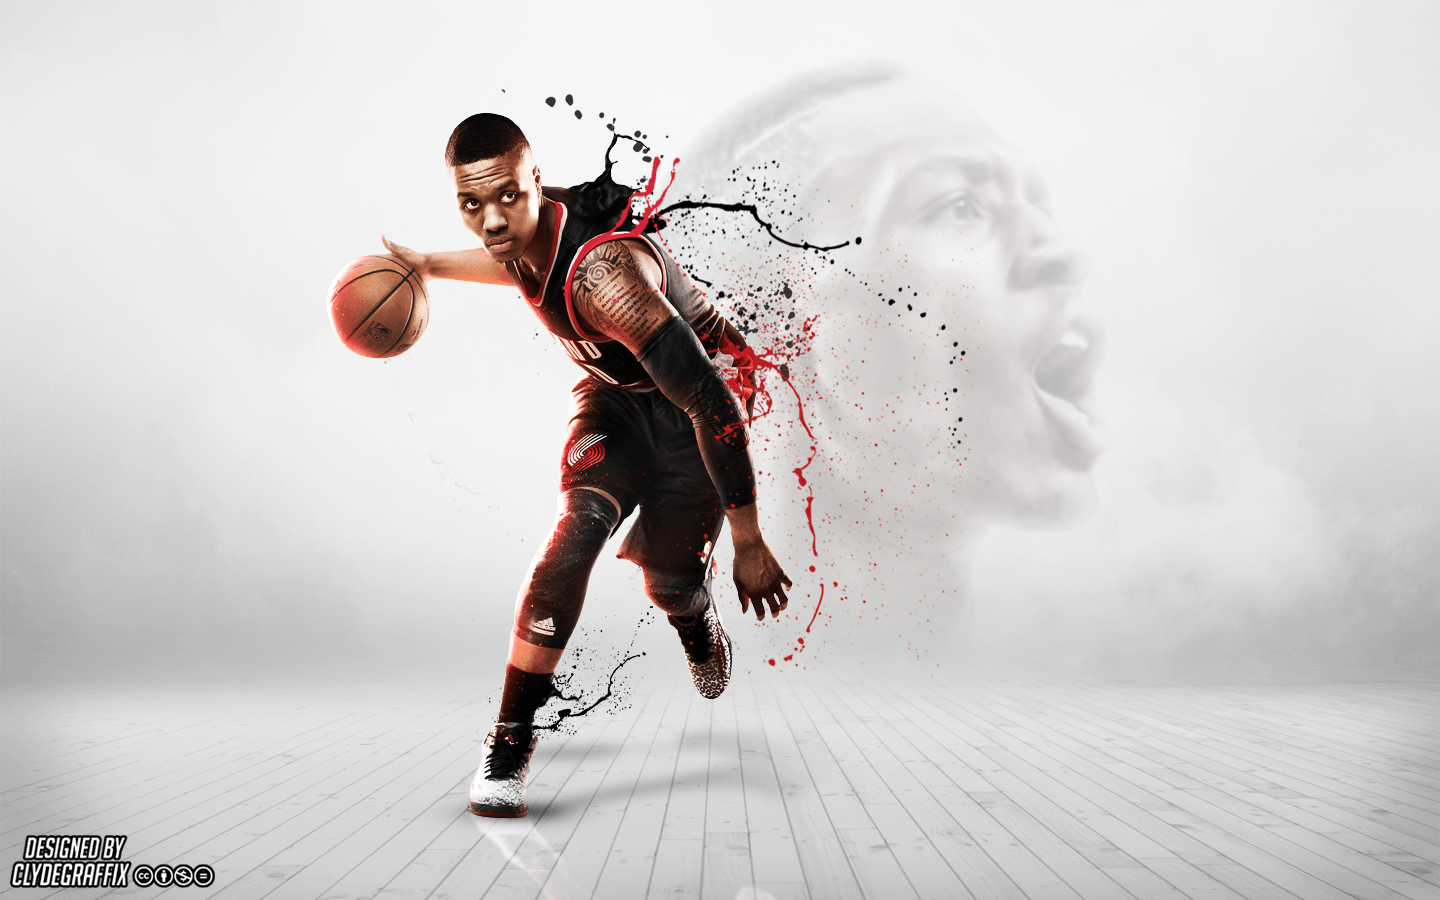 Made a Dame wallpaper I thought some of you guys might like